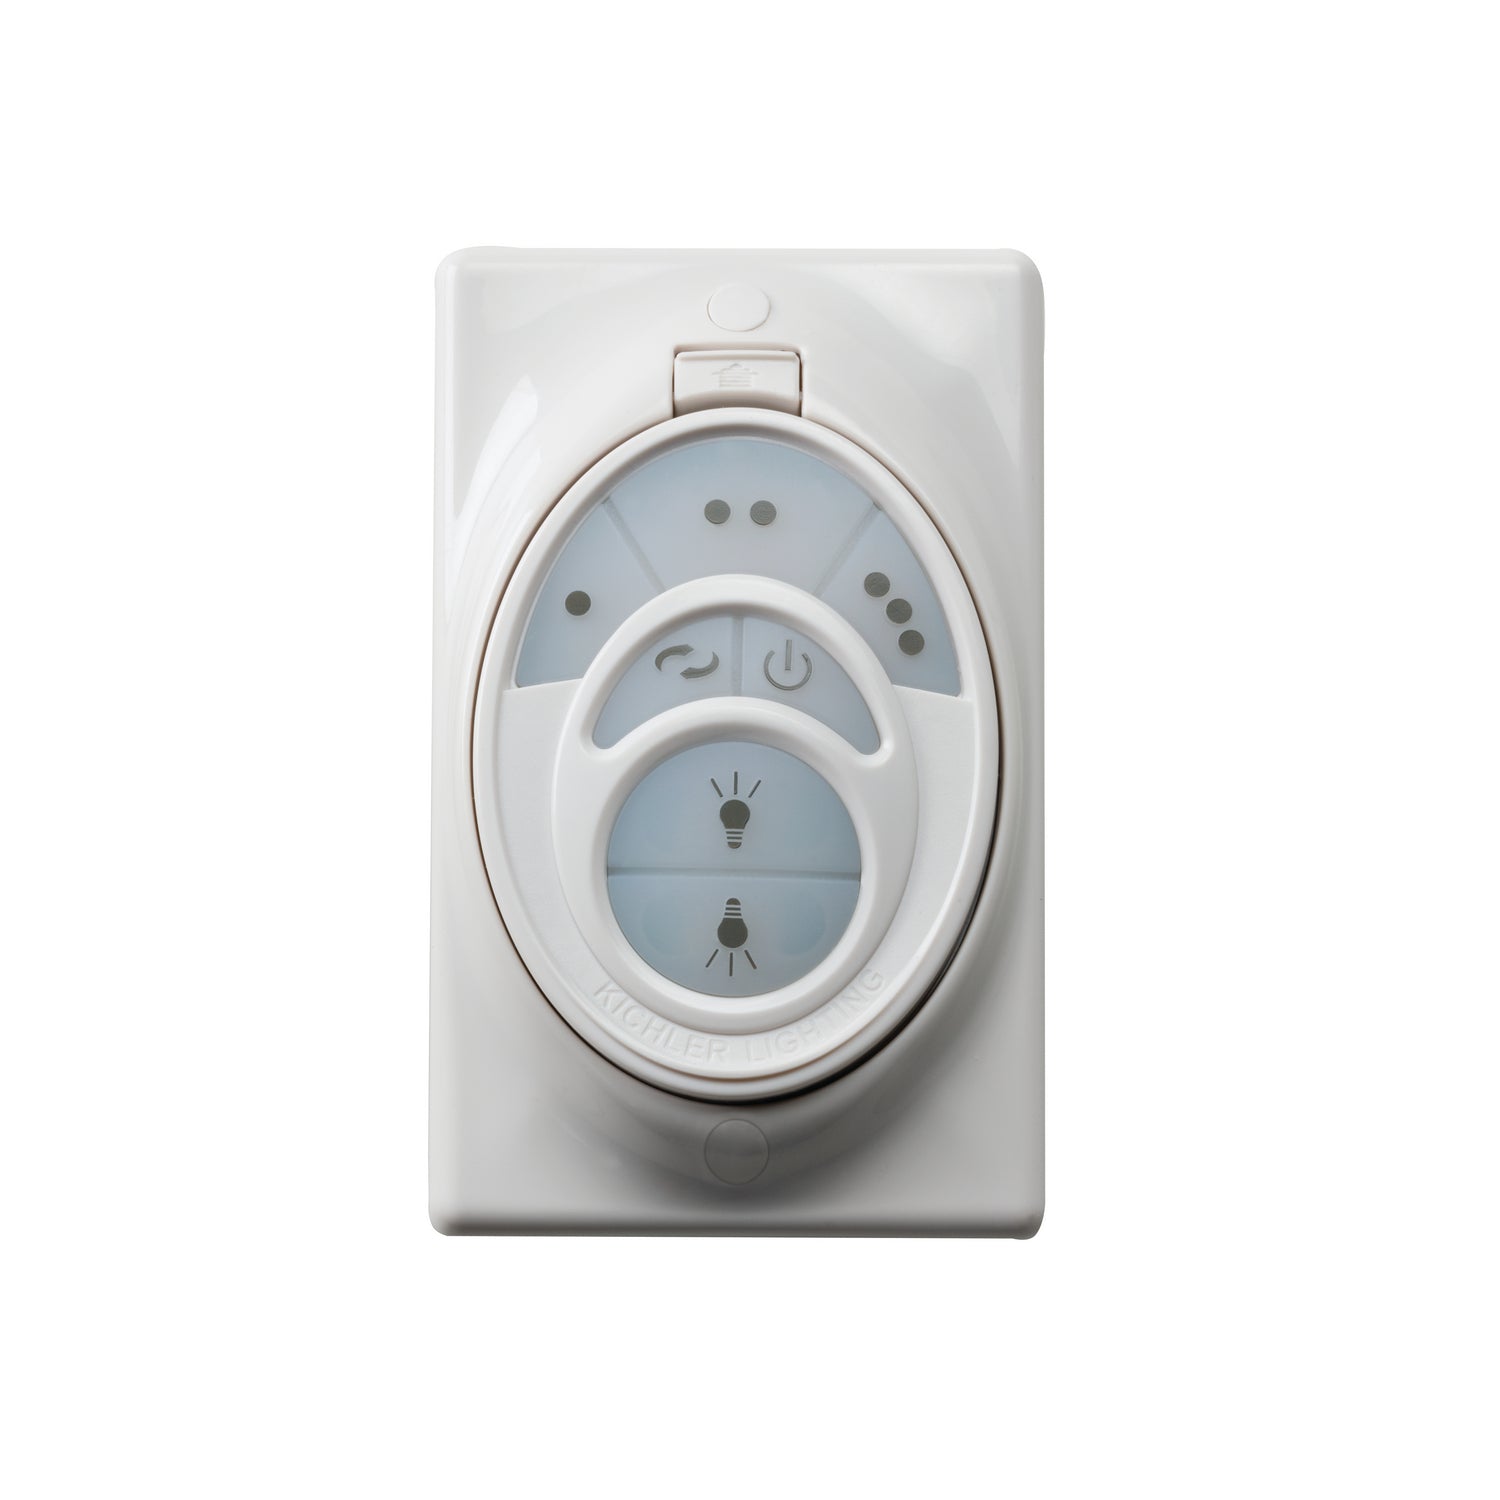 Kichler Canada - Cool Touch Remote Control Syst - Accessory - White- Union Lighting Luminaires Decor